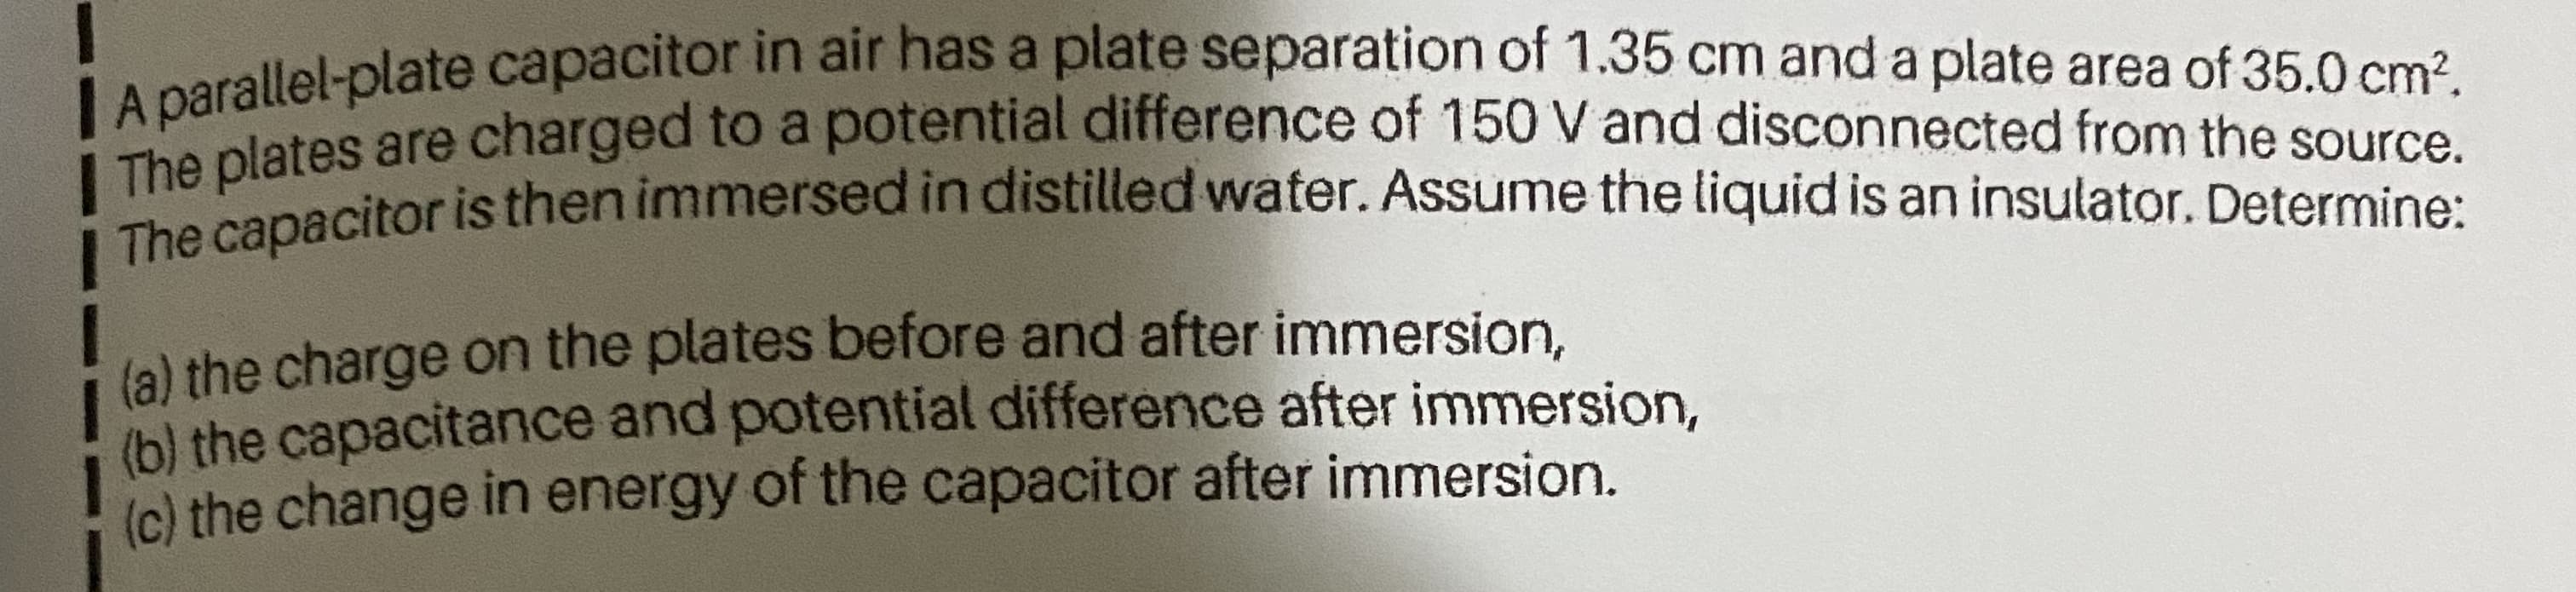 IA parallel-plate capacitor in air has a plate separation of 1.35 cm and a plate area of 35.0 cm².
are charged to a potential difference of 150 V and disconnected from the source.
he pnacitoris then immersed in distilled water. Assume the liquid is an insulator. Determine:
(a) the charge on the plates before and after immersion,
(b) the capacitance and potential difference after immersion,
(c) the change in energy of the capacitor after immersion.
